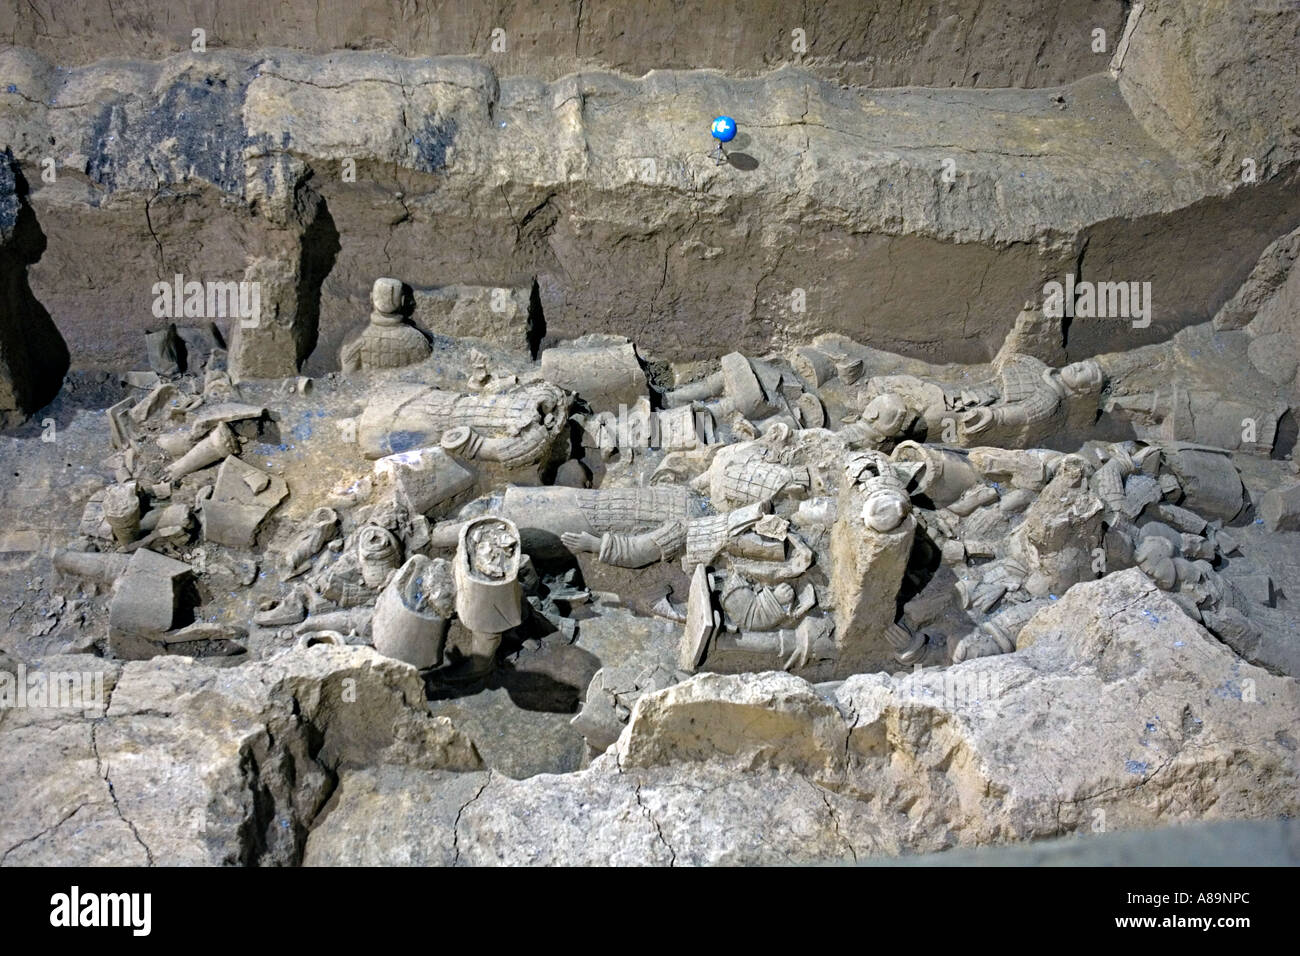 CHINA XI AN Broken statues at the bottom of an excavation area in pit number two Stock Photo